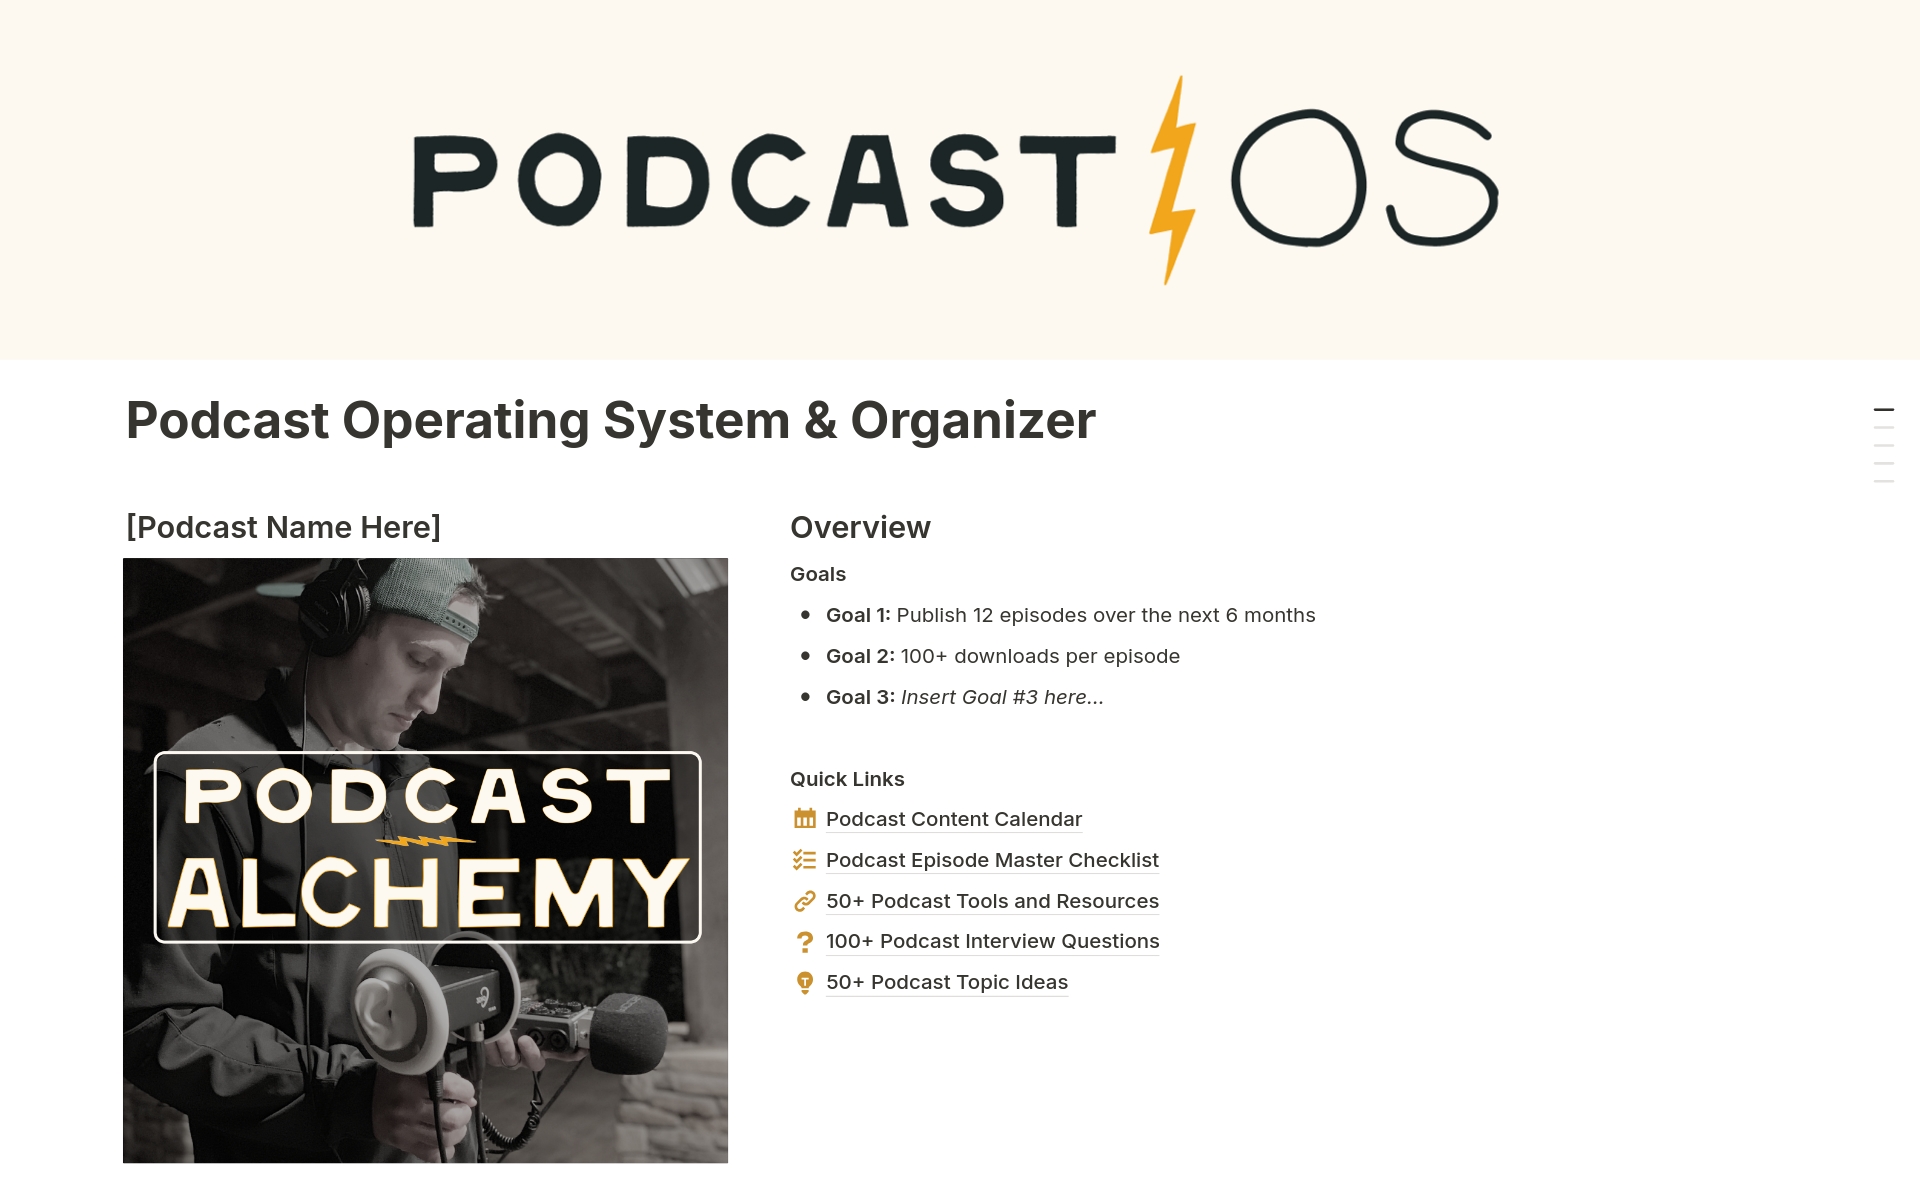 The Podcast Operating System is a comprehensive template designed to streamline and organize your podcast workflow. It includes tools for planning, scheduling, recording, and analyzing episodes, ensuring your podcasting process is organized and efficient.